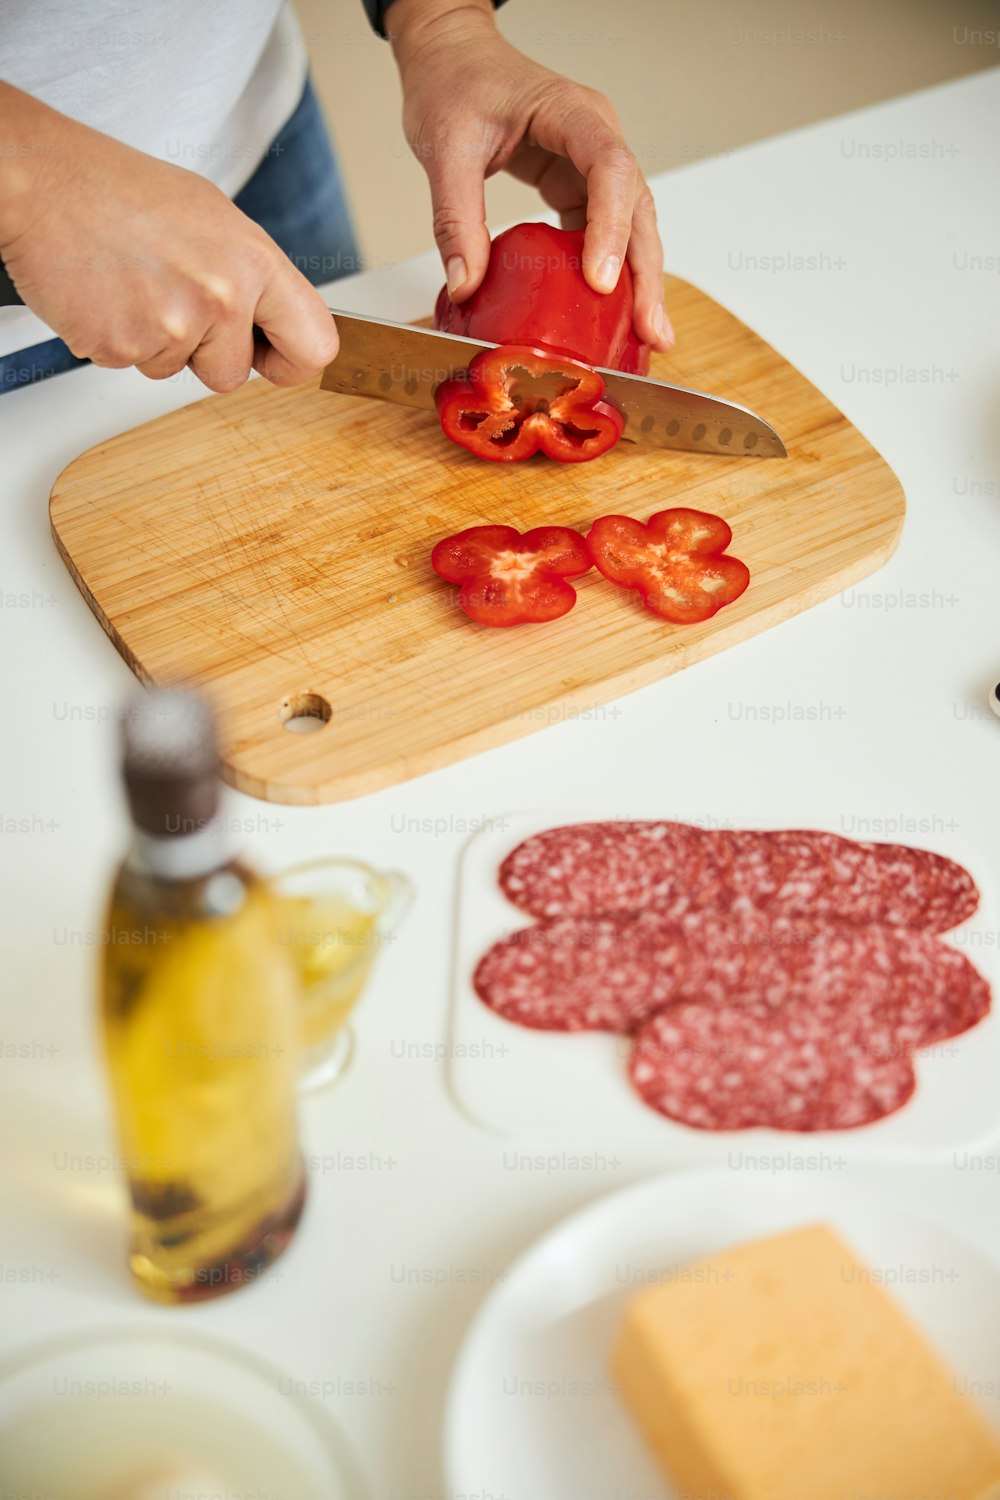 Close up of a kitchen table with slices sausages and a bottle of oil. Woman cutting pepper on the board